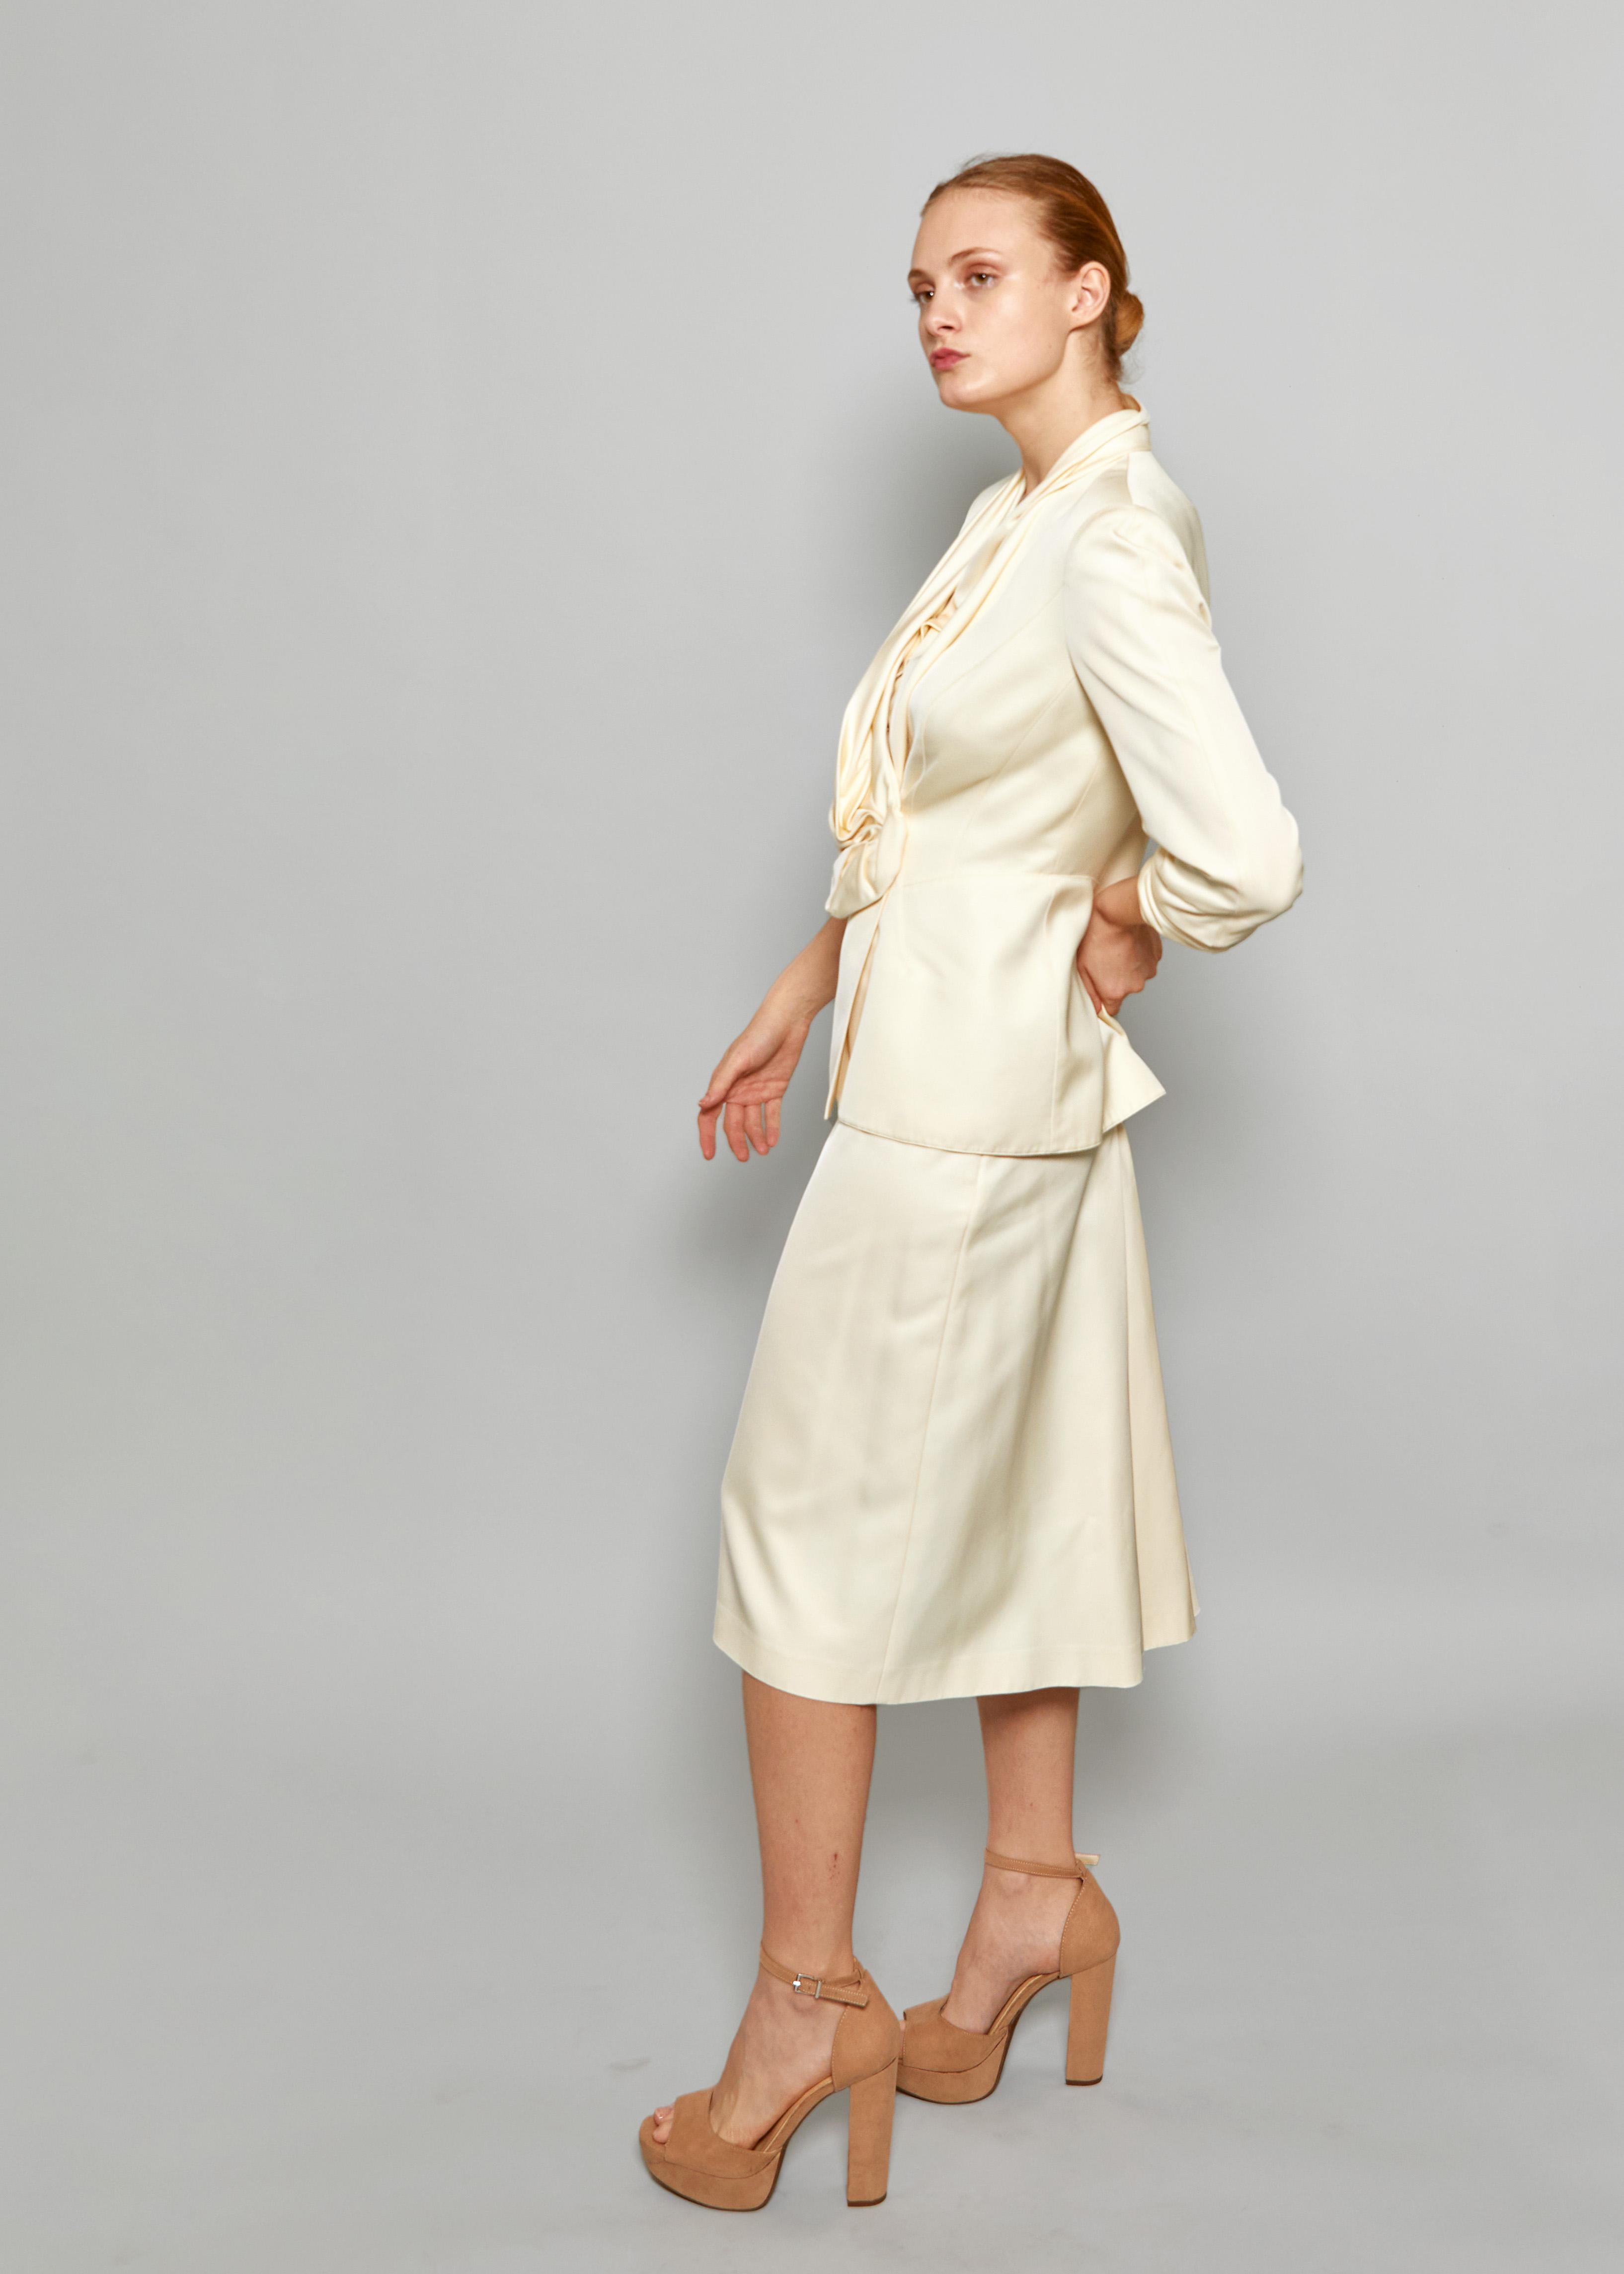 Thierry Mugler 1990's Ivory Silk Skirt Suit For Sale 1